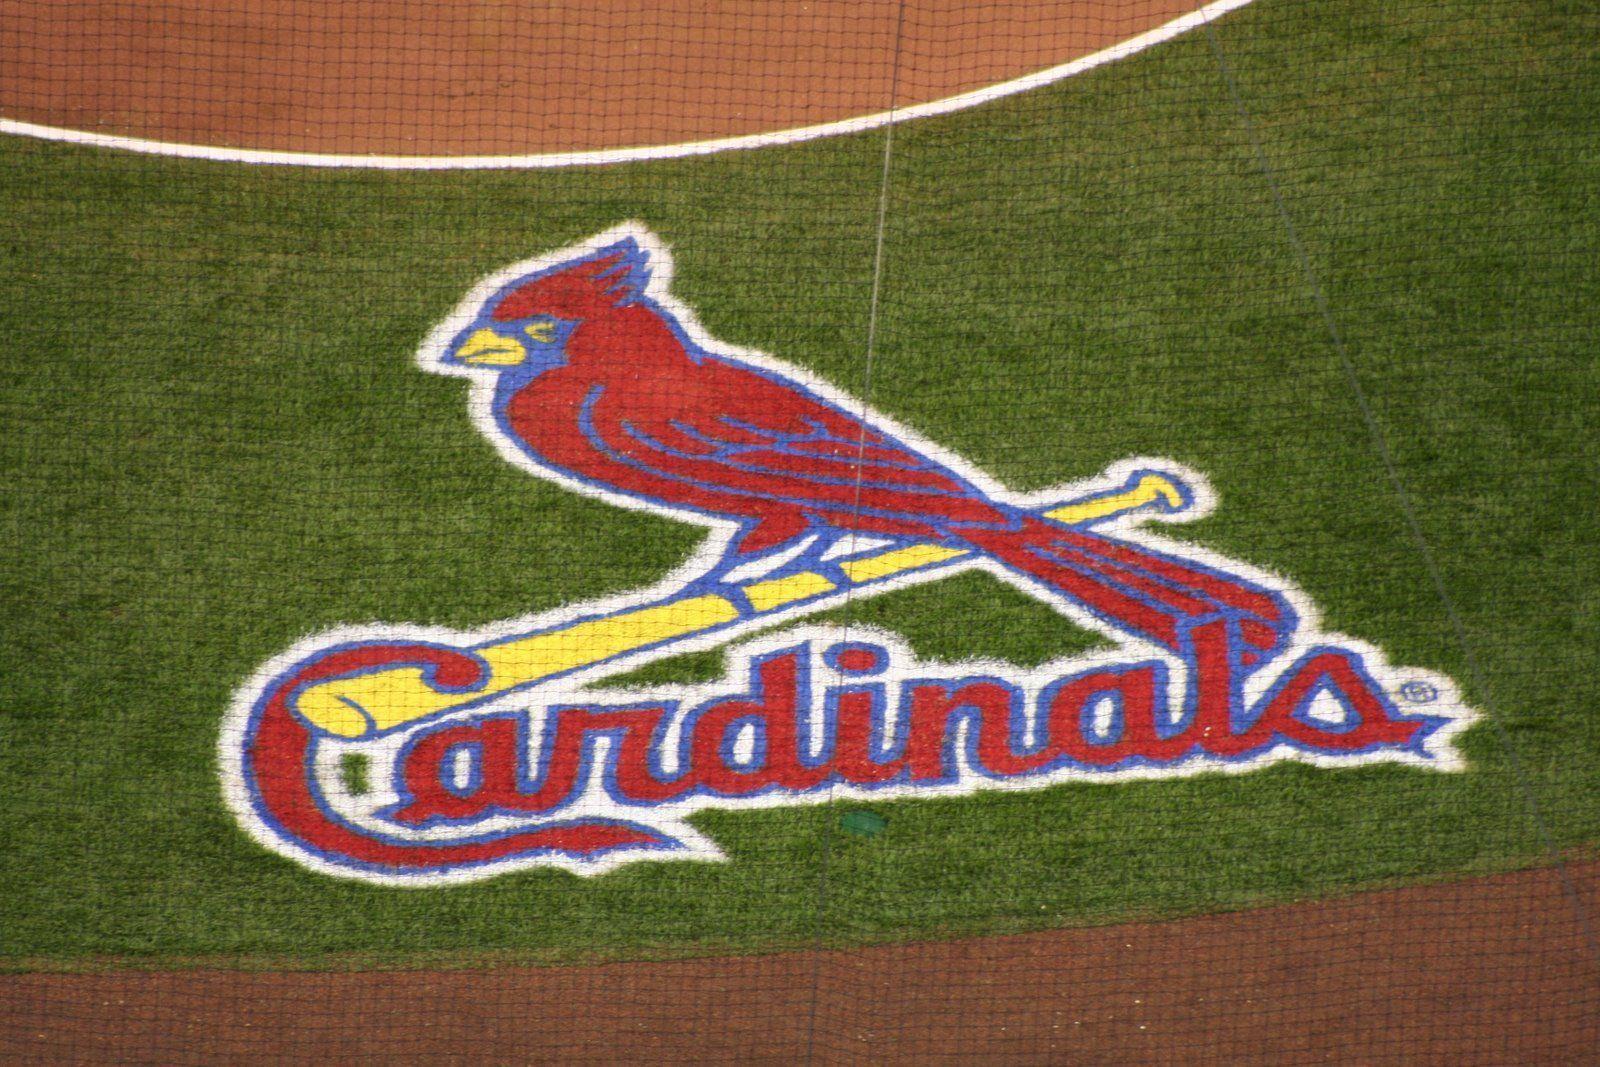 Background of the day: St. Louis Cardinals. St. Louis Cardinals